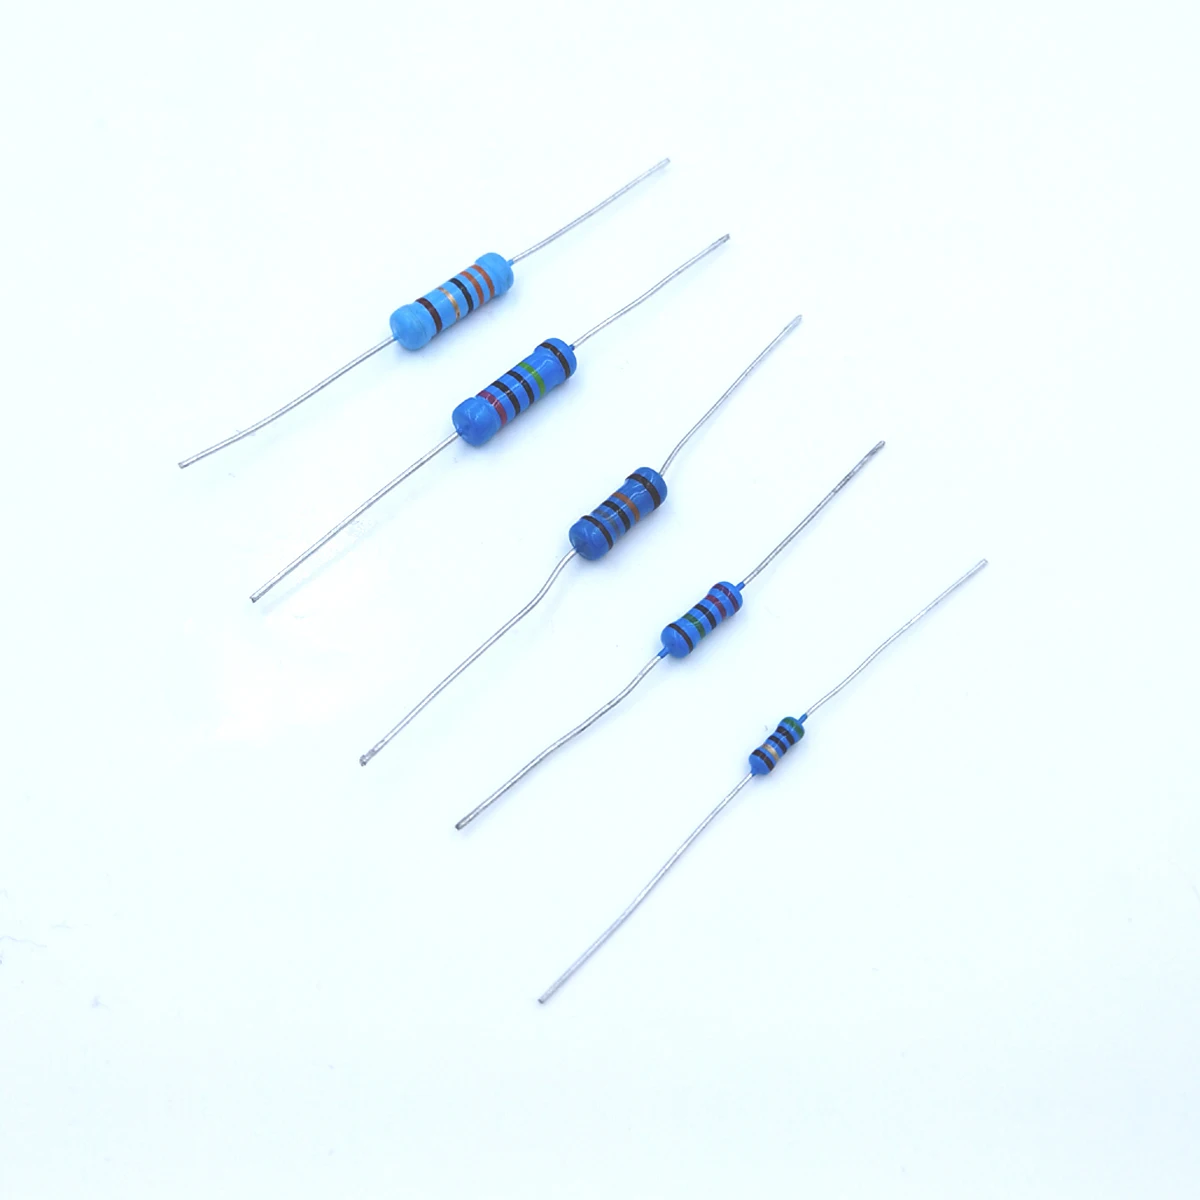 100Pcs 2.4M 2.7M 22M 2M 3.3M 3.9M 3M 4.7M 5.1M 6.8M R Ohm 1/2W 0.5W 1% Metal Film Resistor Colored ring Resistance